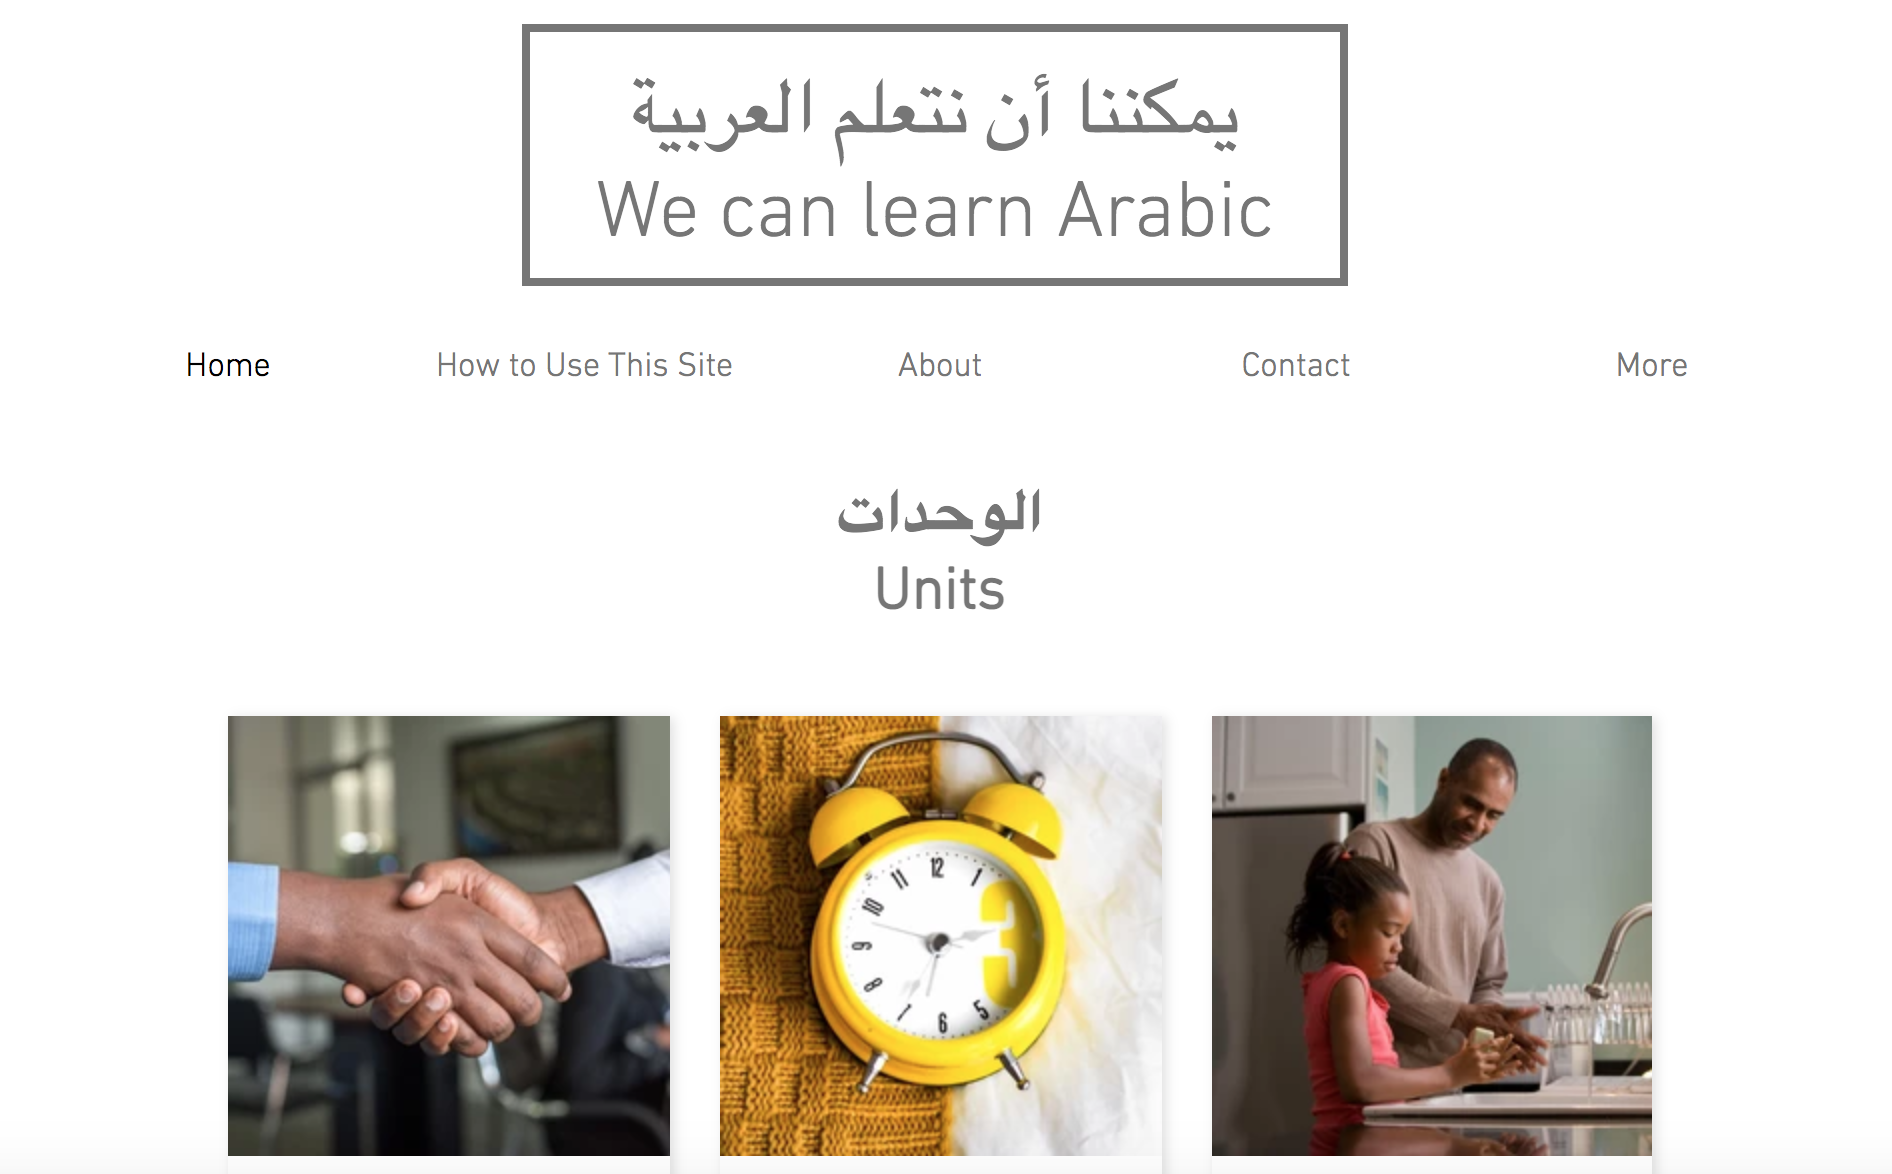 We Can Learn Arabic Website: Spring Update